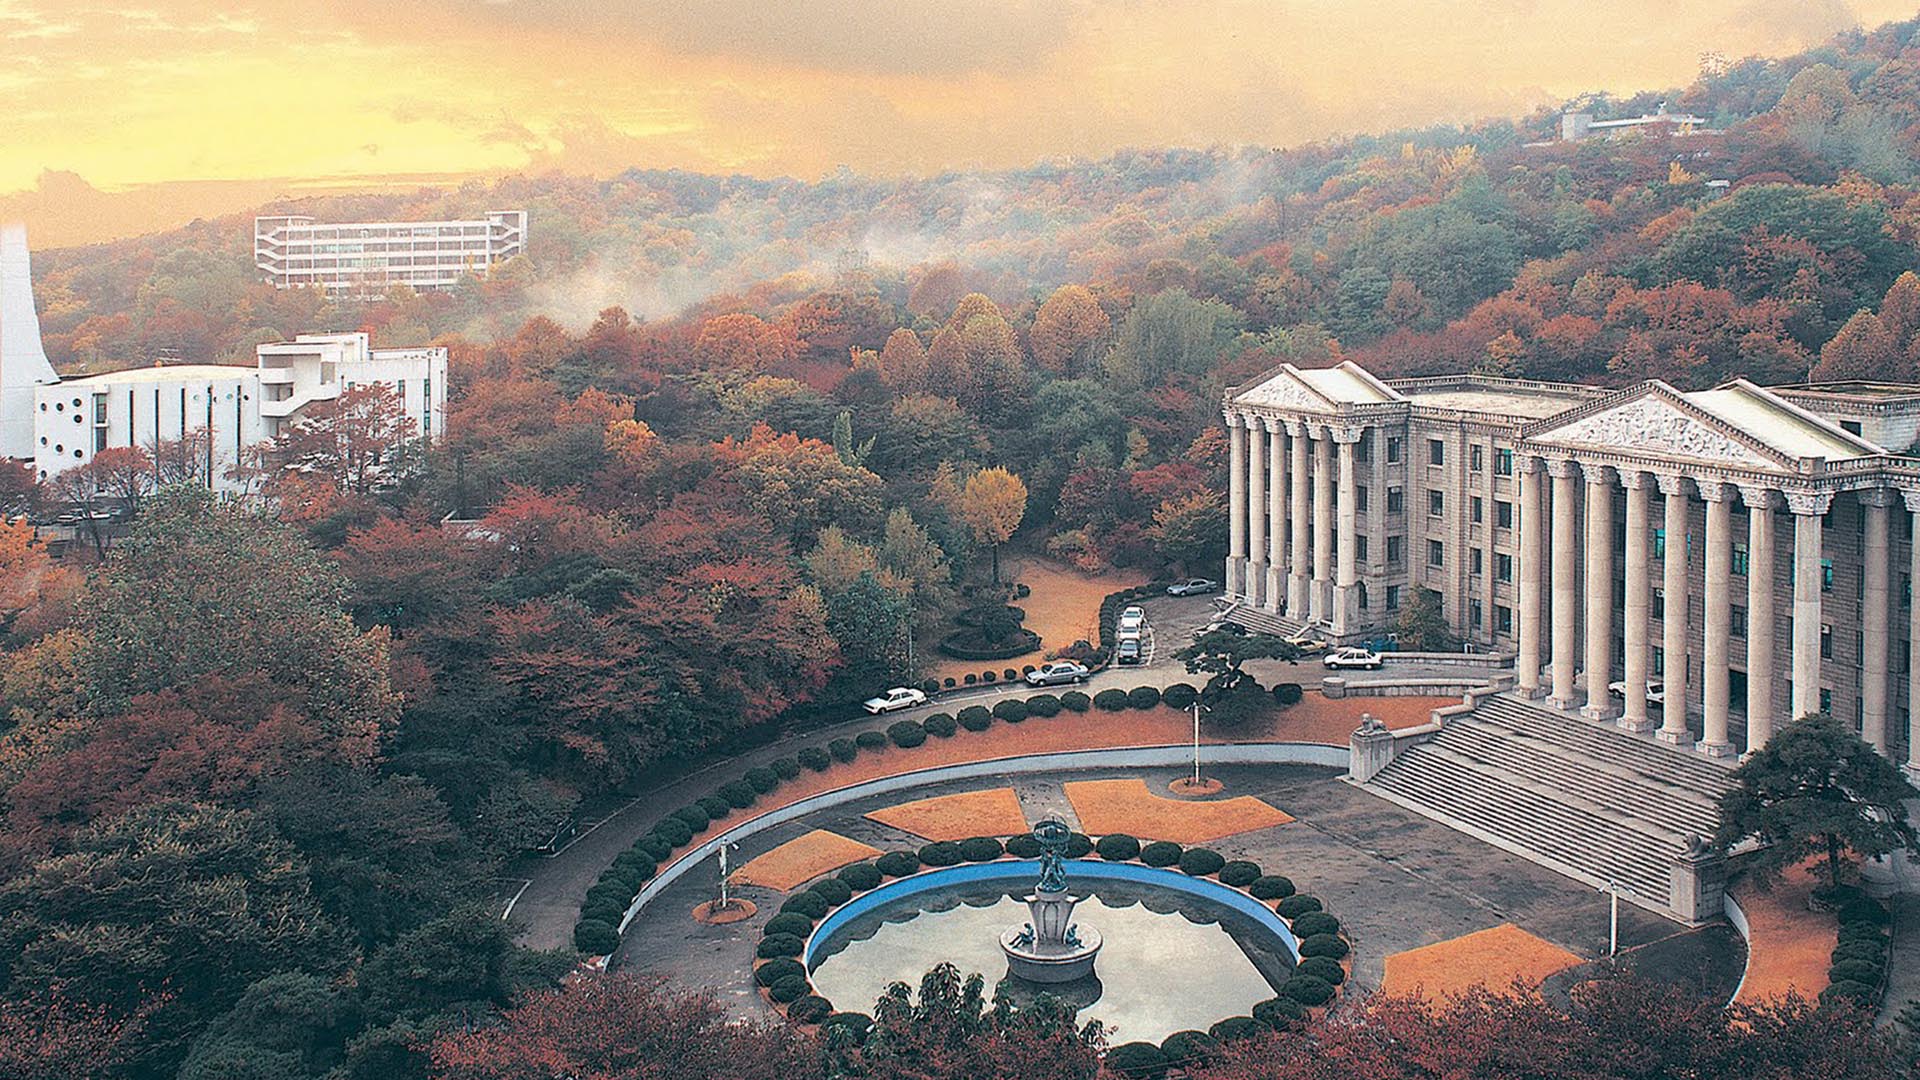 Kyung Hee University | Study in South Korea | Education Abroad